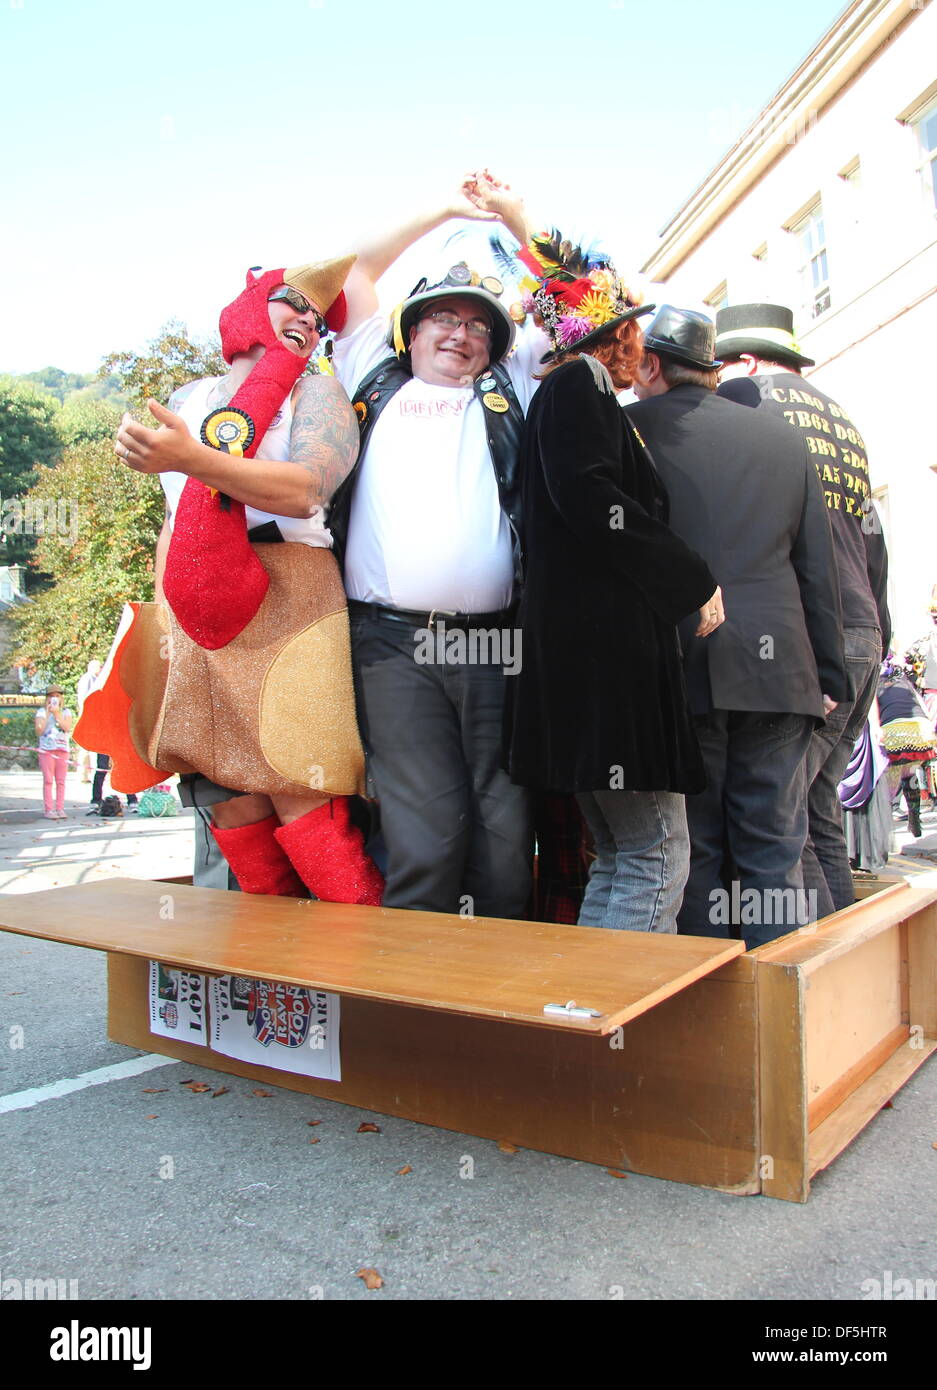 Derbyshire, UK. 28 Sept 2013. The Official Monster Raving Loony Party holds its traditional cabinet re-shuffle where party members and supporters climb inside a wooden cabinet and shuffle. The party conference was held alongside the second annual Steampunk Illuminati event at The Grand Pavilion in Matlock Bath, Derbyshire. Credit:  Deborah Vernon/Alamy Live News Stock Photo